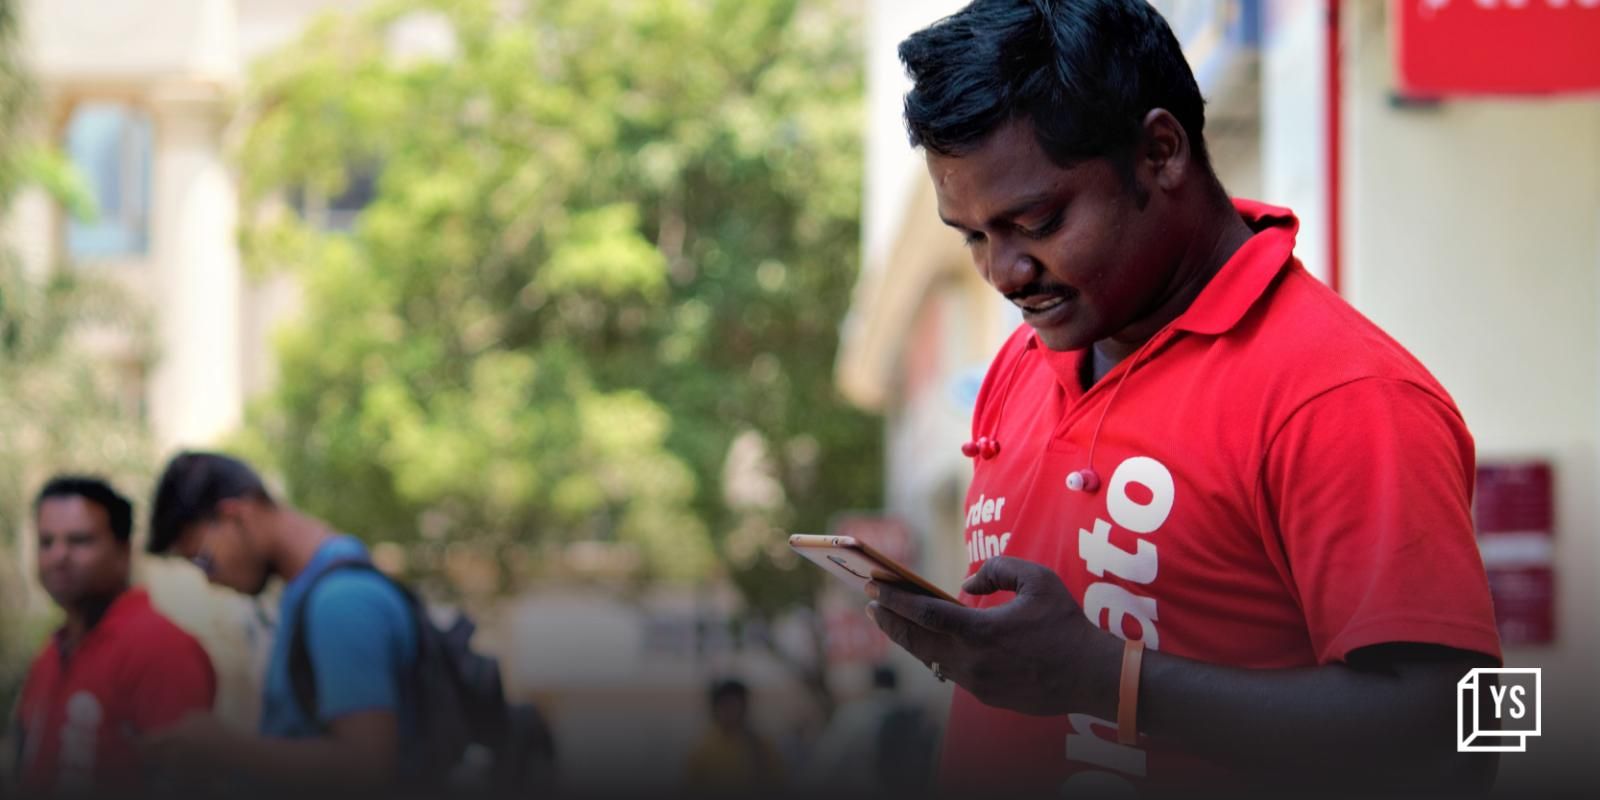 Zomato seeks higher commission from restaurants as food delivery business slows